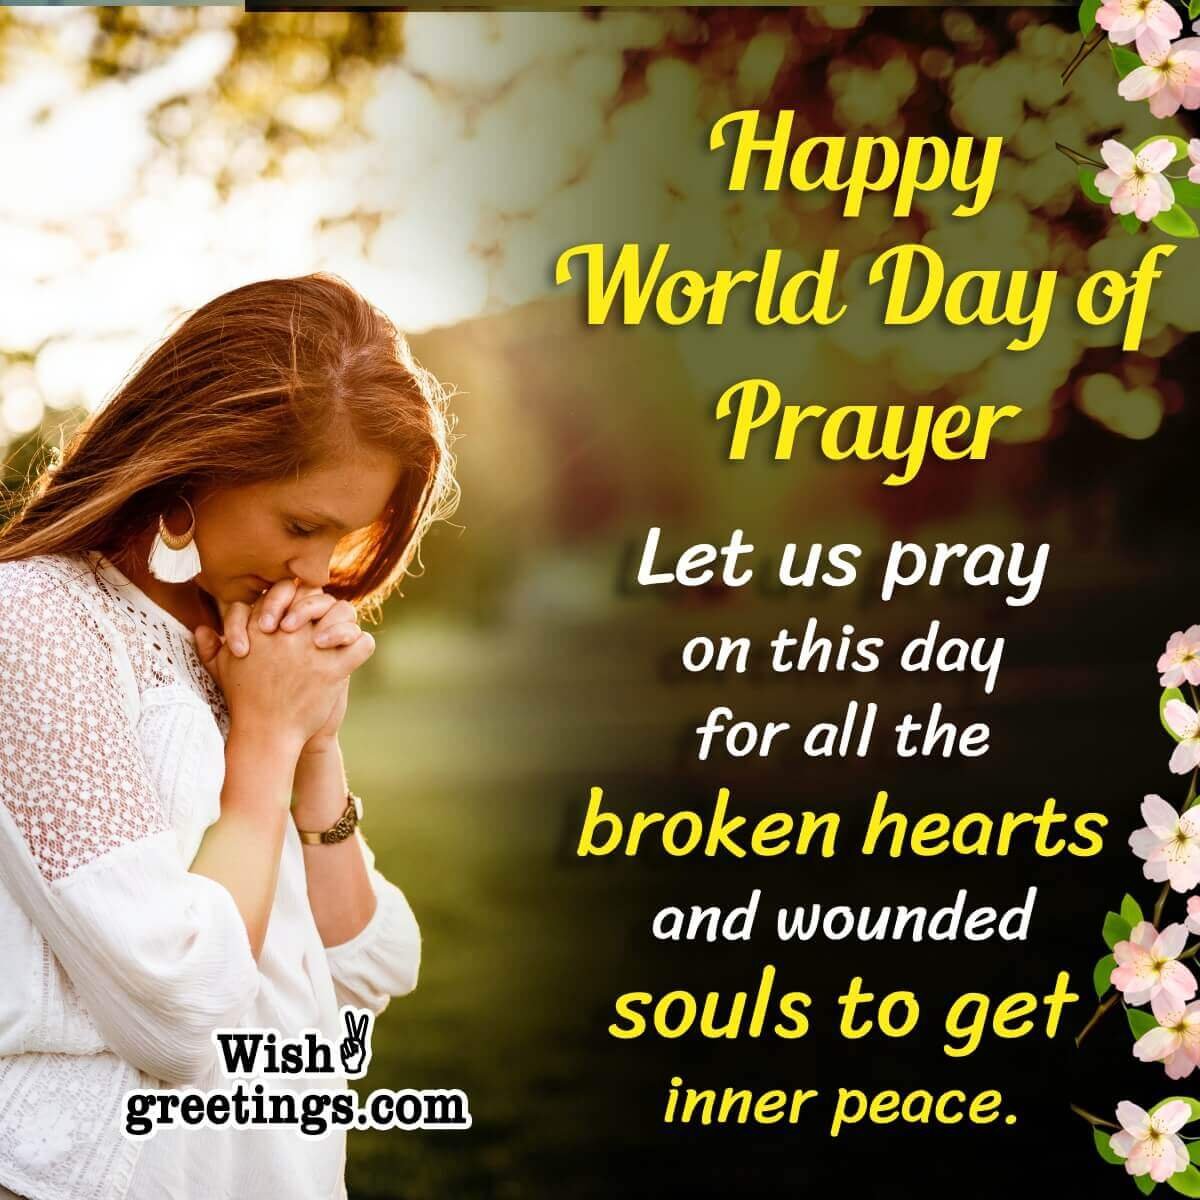 World Day of Prayer Messages - Wish Greetings